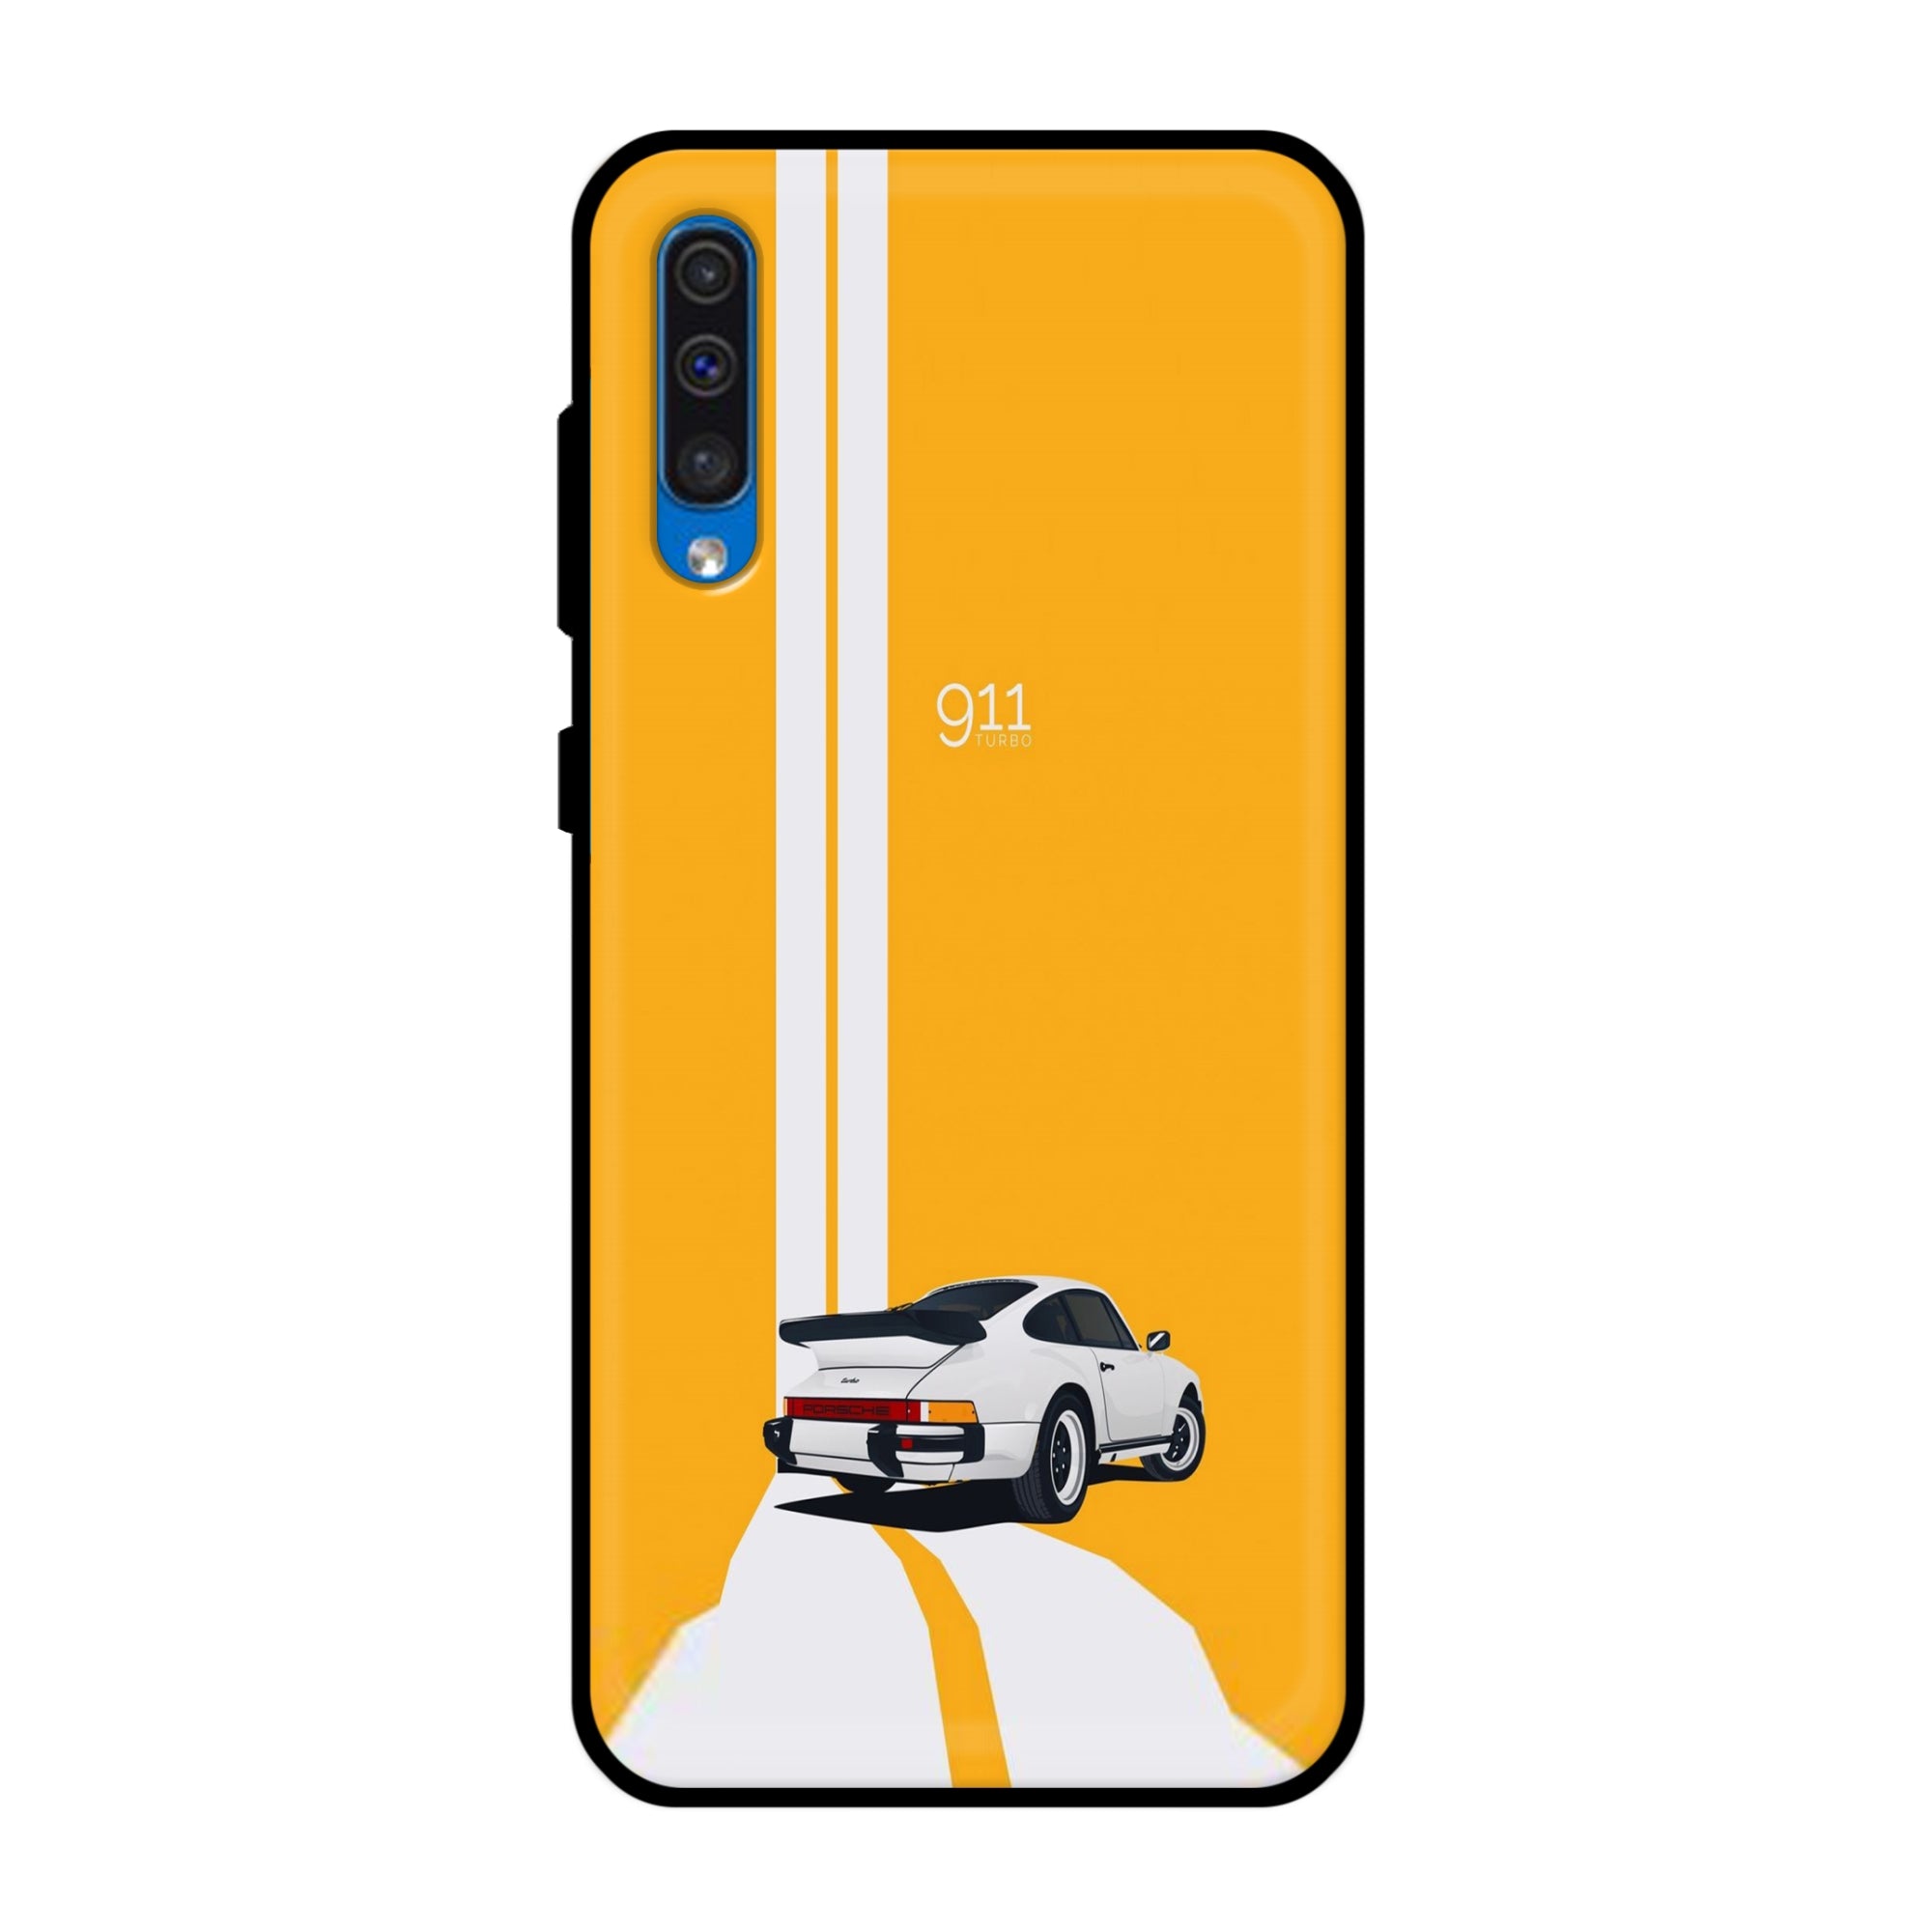 Buy 911 Gt Porche Metal-Silicon Back Mobile Phone Case/Cover For Samsung Galaxy A50 / A50s / A30s Online